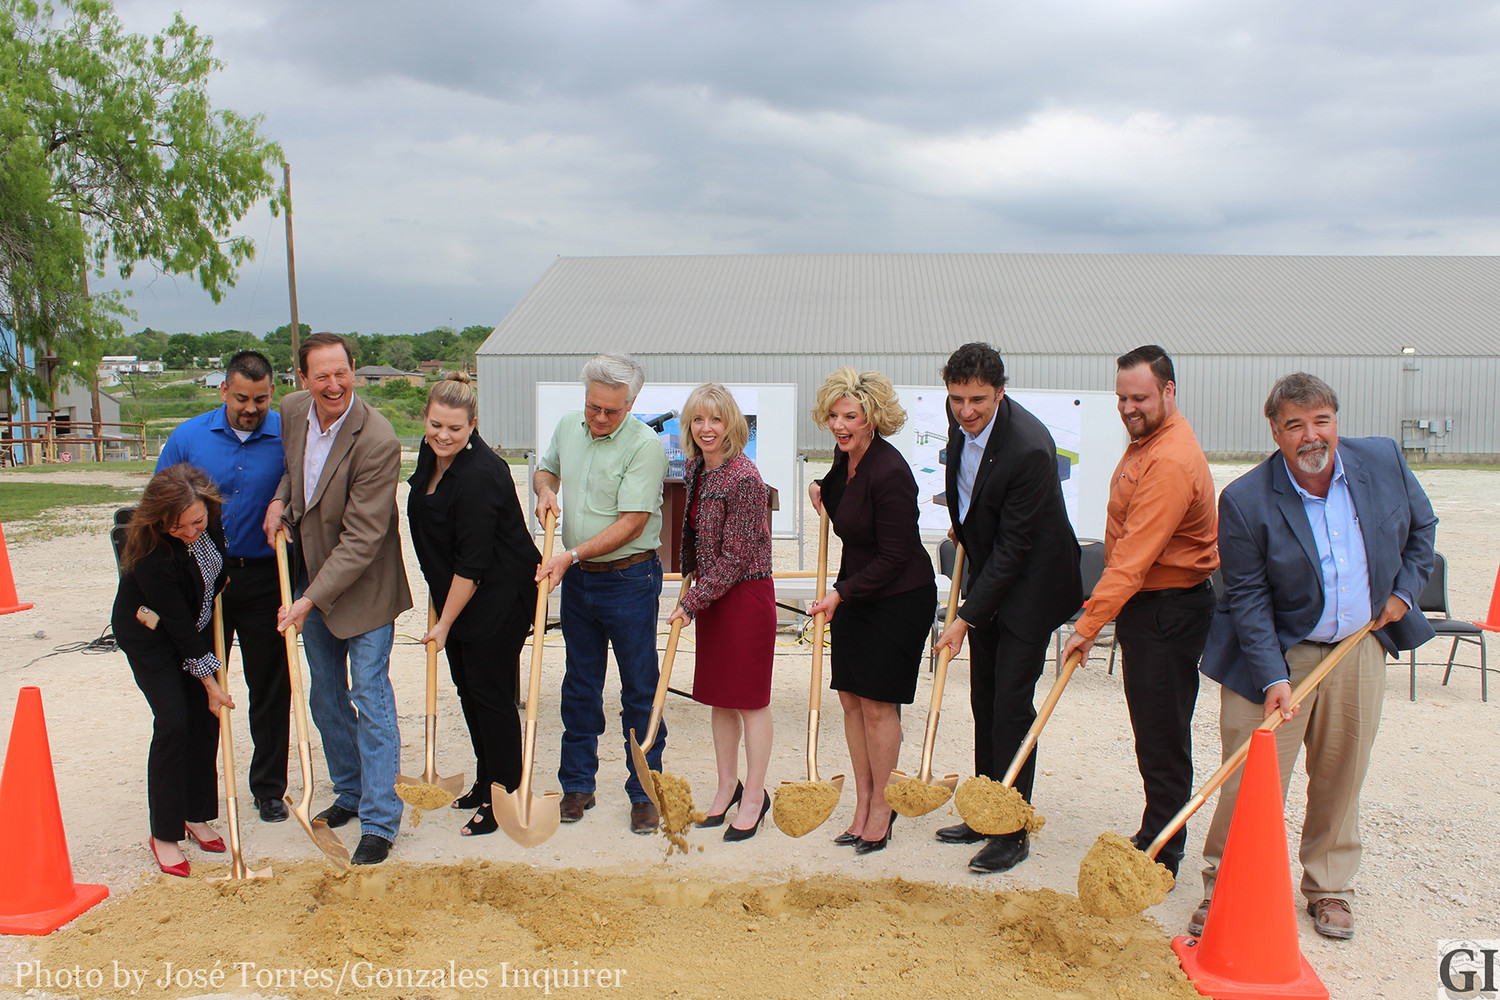 The groundbreaking ceremony for BYK’s historic $50 million expansion project took place on Thursday, April 12. Pictured with the first shovels are: Dr. Kim Strozier of the Gonzales Independent School District, Justin Schwausch of GVEC and a member of the GISD school board, Arturo, a manager at BYK, Judge David Bird, Lindsay Dennis (Governor’s Office), Dr. Ken Gottwald from the Gonzales Hospital District, Alison Avery (BYK North American operations president), Mayor Connie Kacir, Dr. Stephan Glander, BYK World operations president), Dewey Smith, and Glenn West, general manager at BYK in Gonzales, Texas.